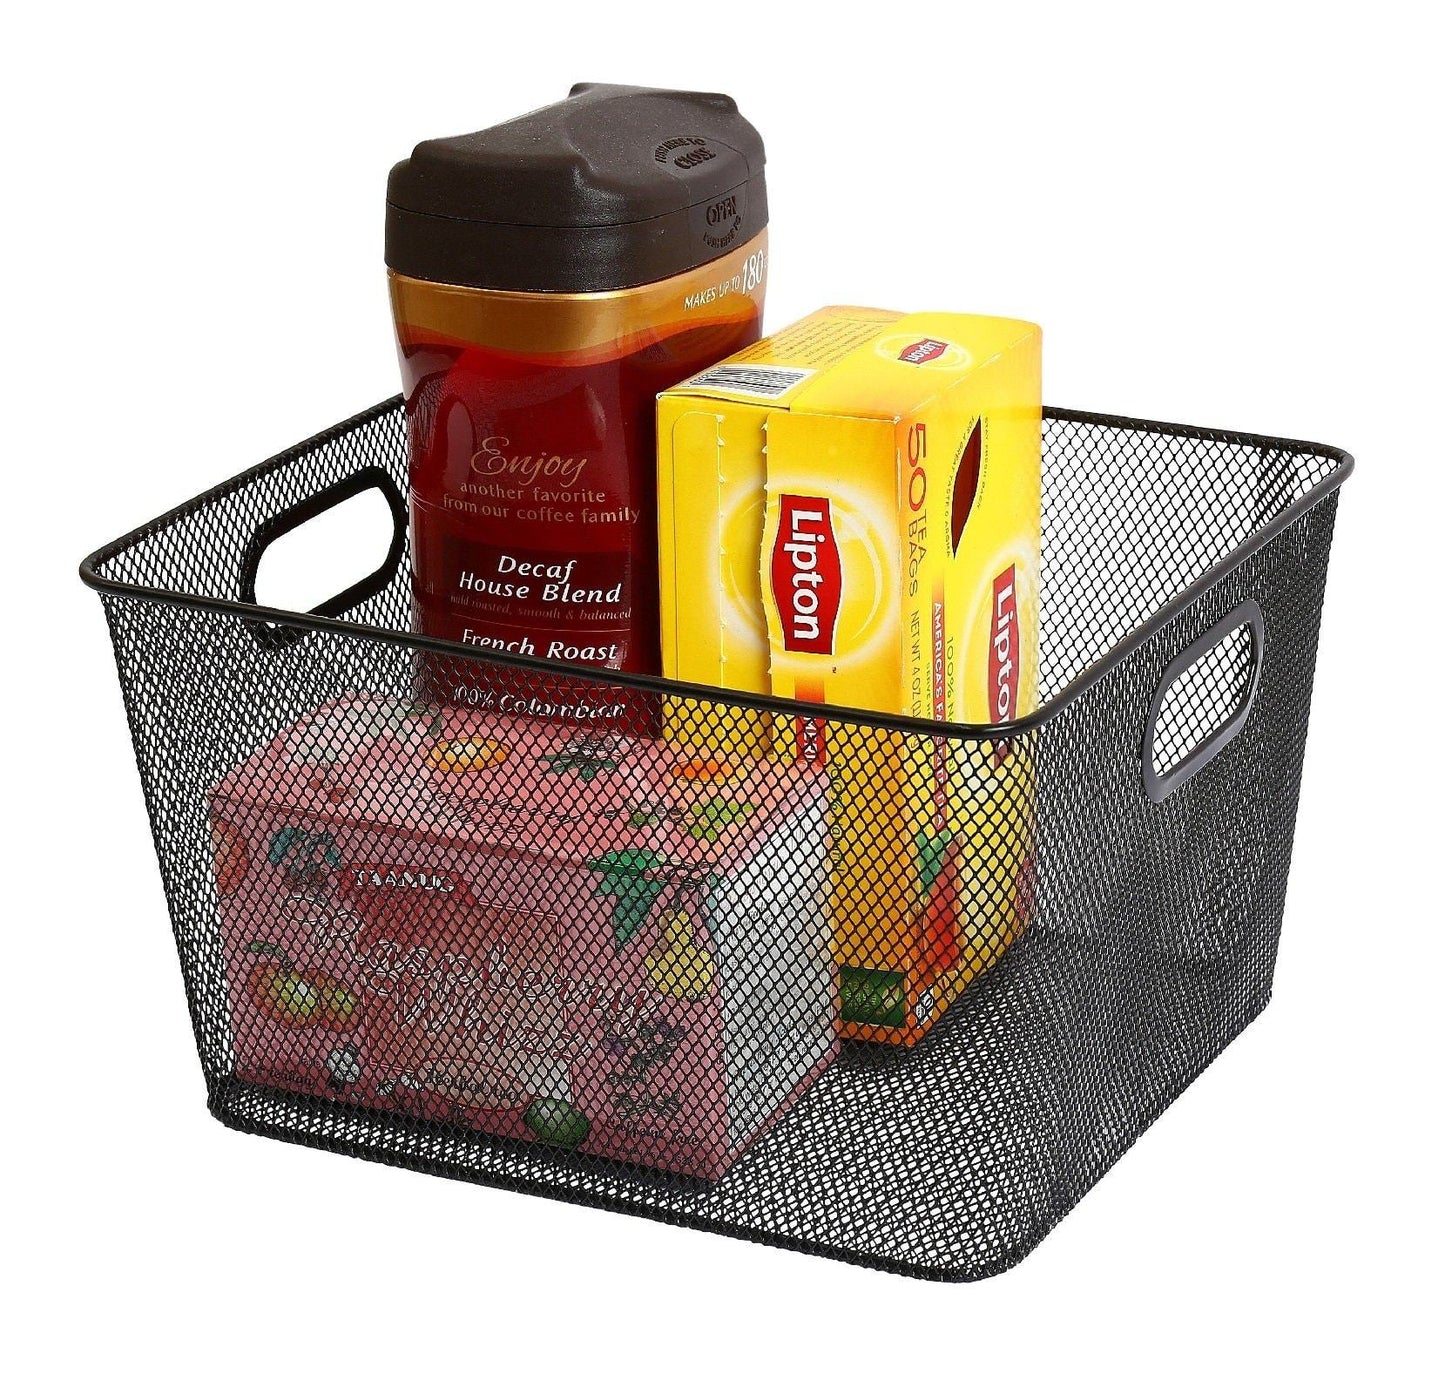 Great ybm home household wire mesh open bin shelf storage basket organizer black for kitchen pantry cabinet fruits vegetables pantry items toys 1041s 12 12 10 x 9 x 6